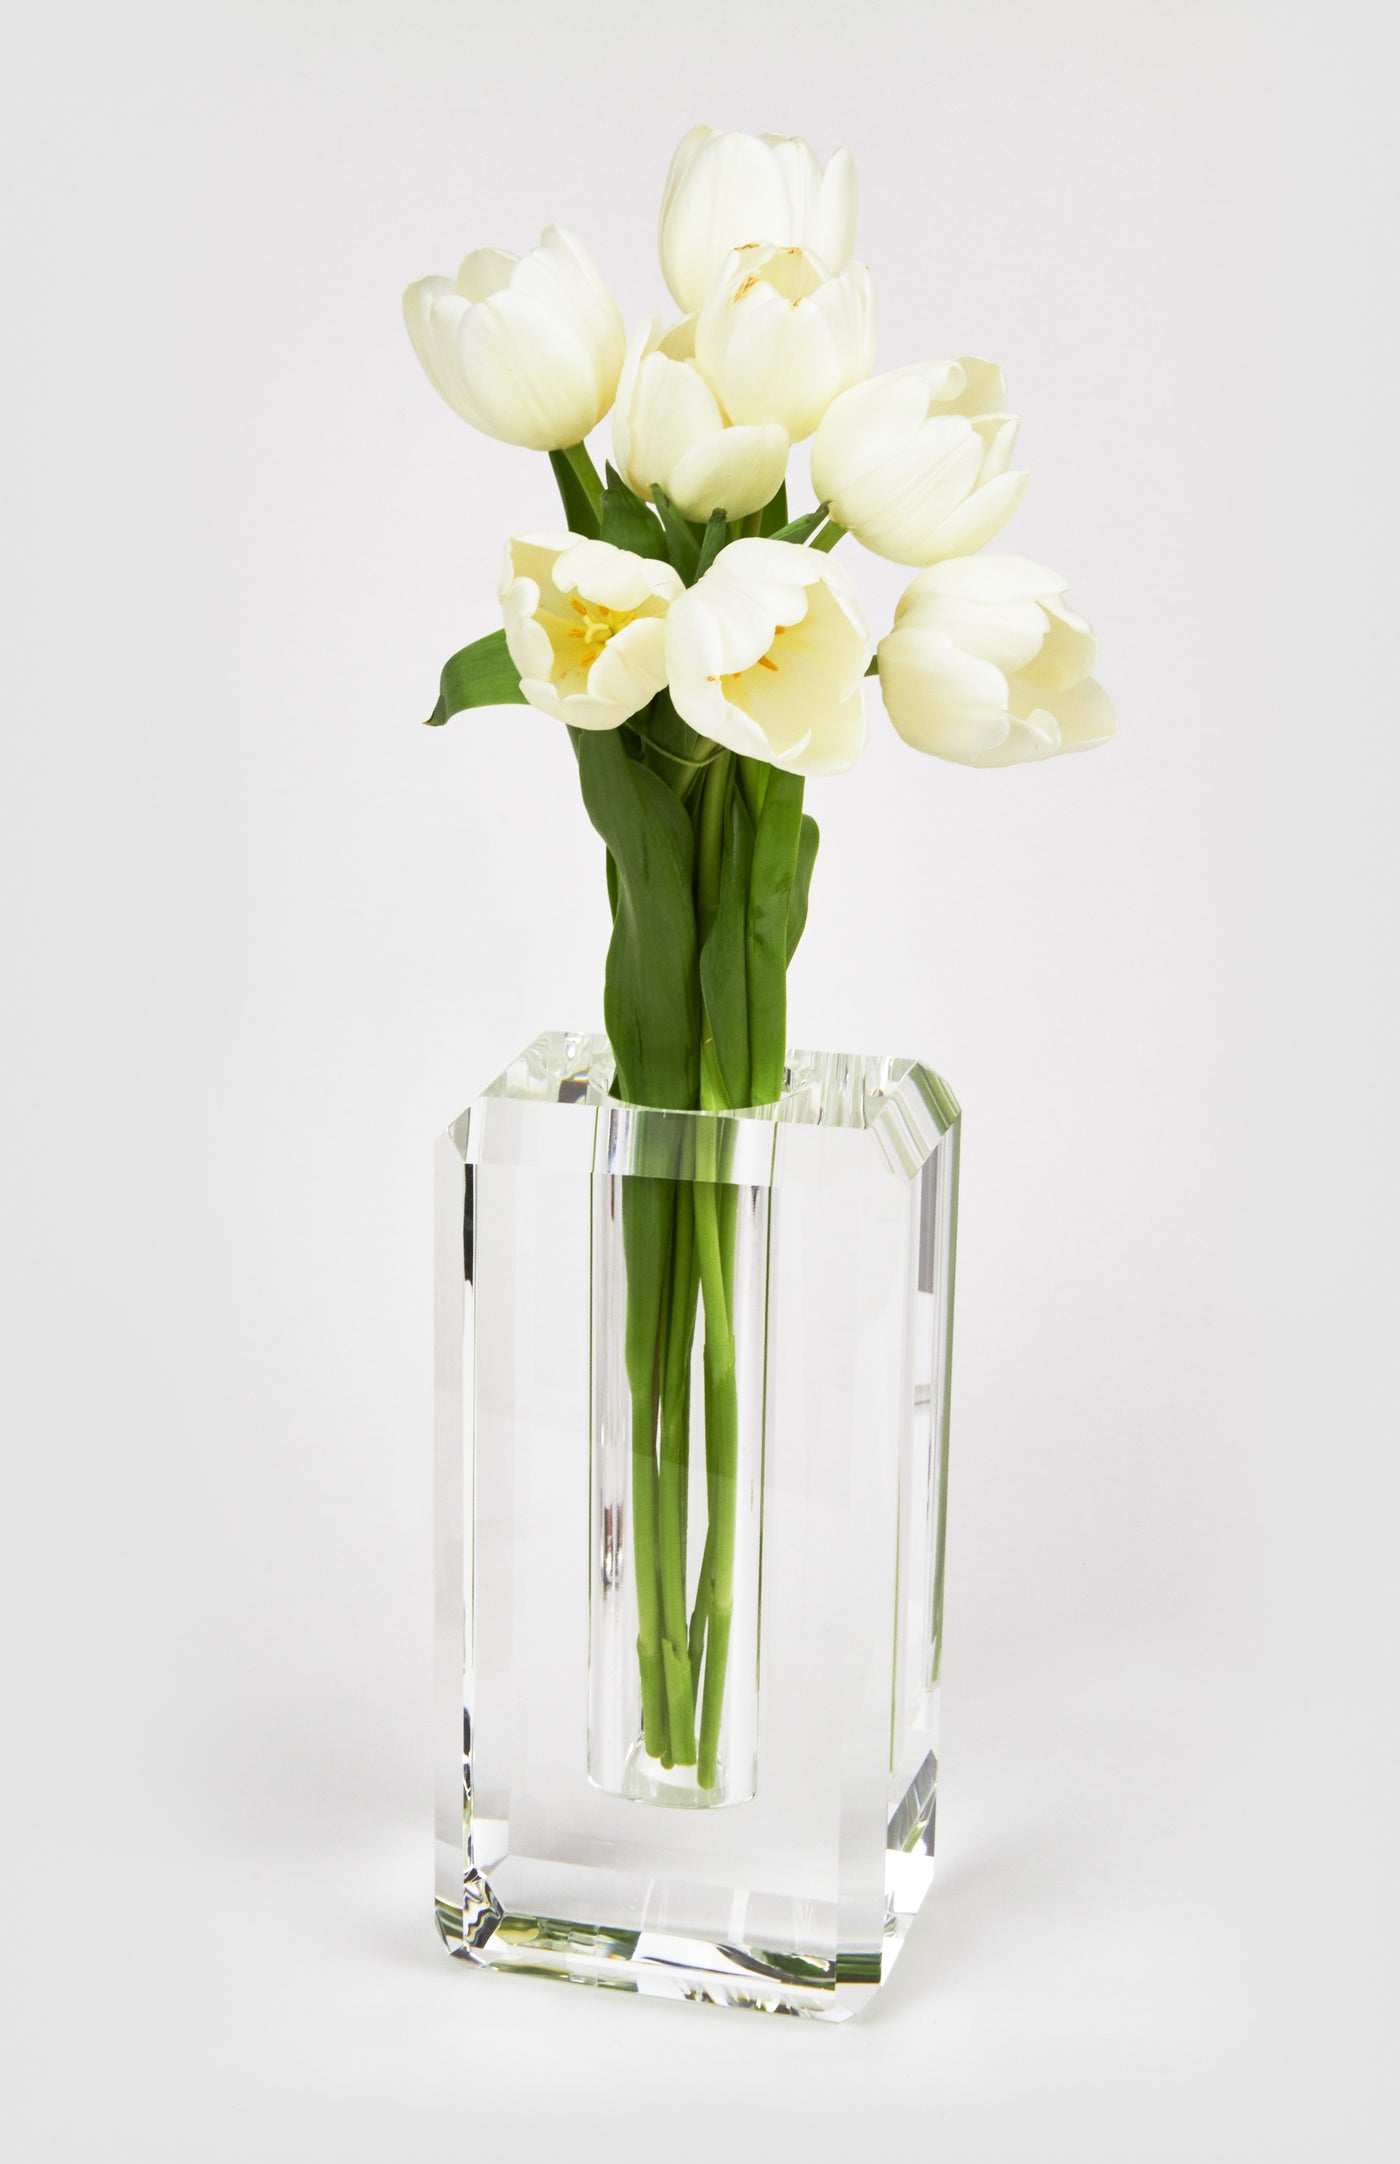 VASE CRYSTAL GLASS HEXAGONAL EDGE (Available in 2 Sizes)